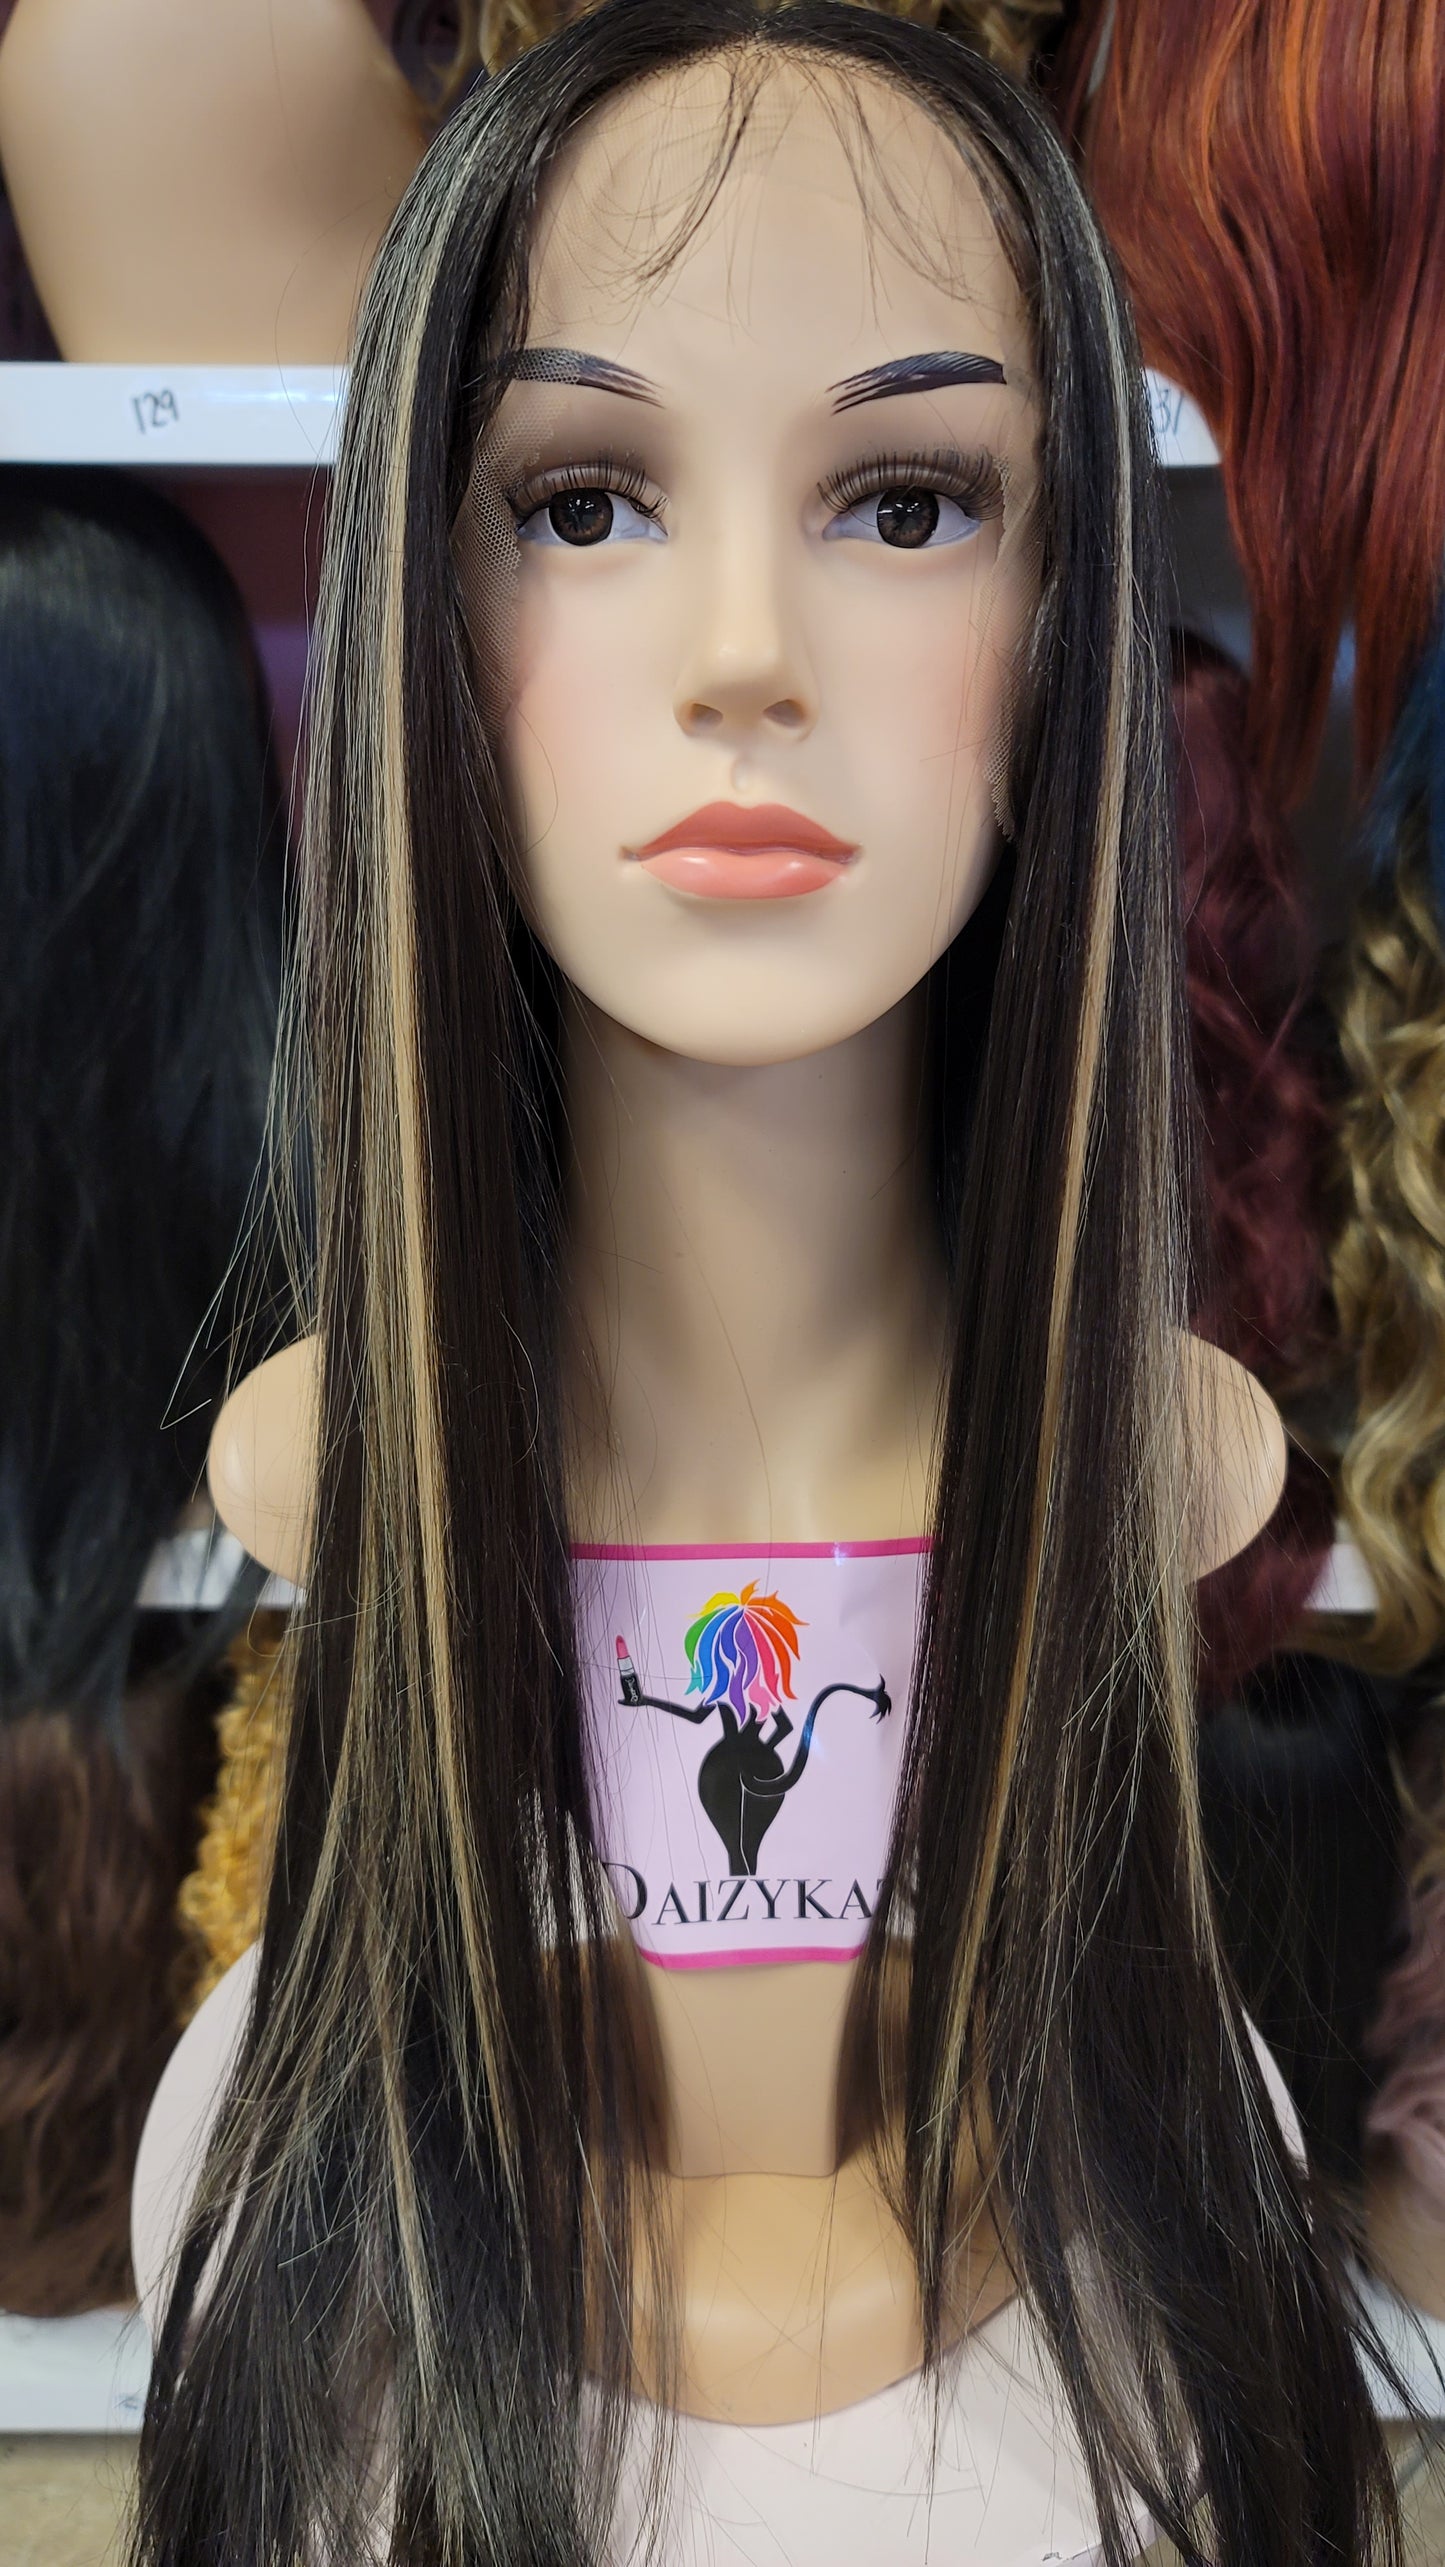 32 Alexa- Middle Part Lace Front Wig - 2/26 - DaizyKat Cosmetics 32 Alexa- Middle Part Lace Front Wig - 2/26 DaizyKat Cosmetics Wigs